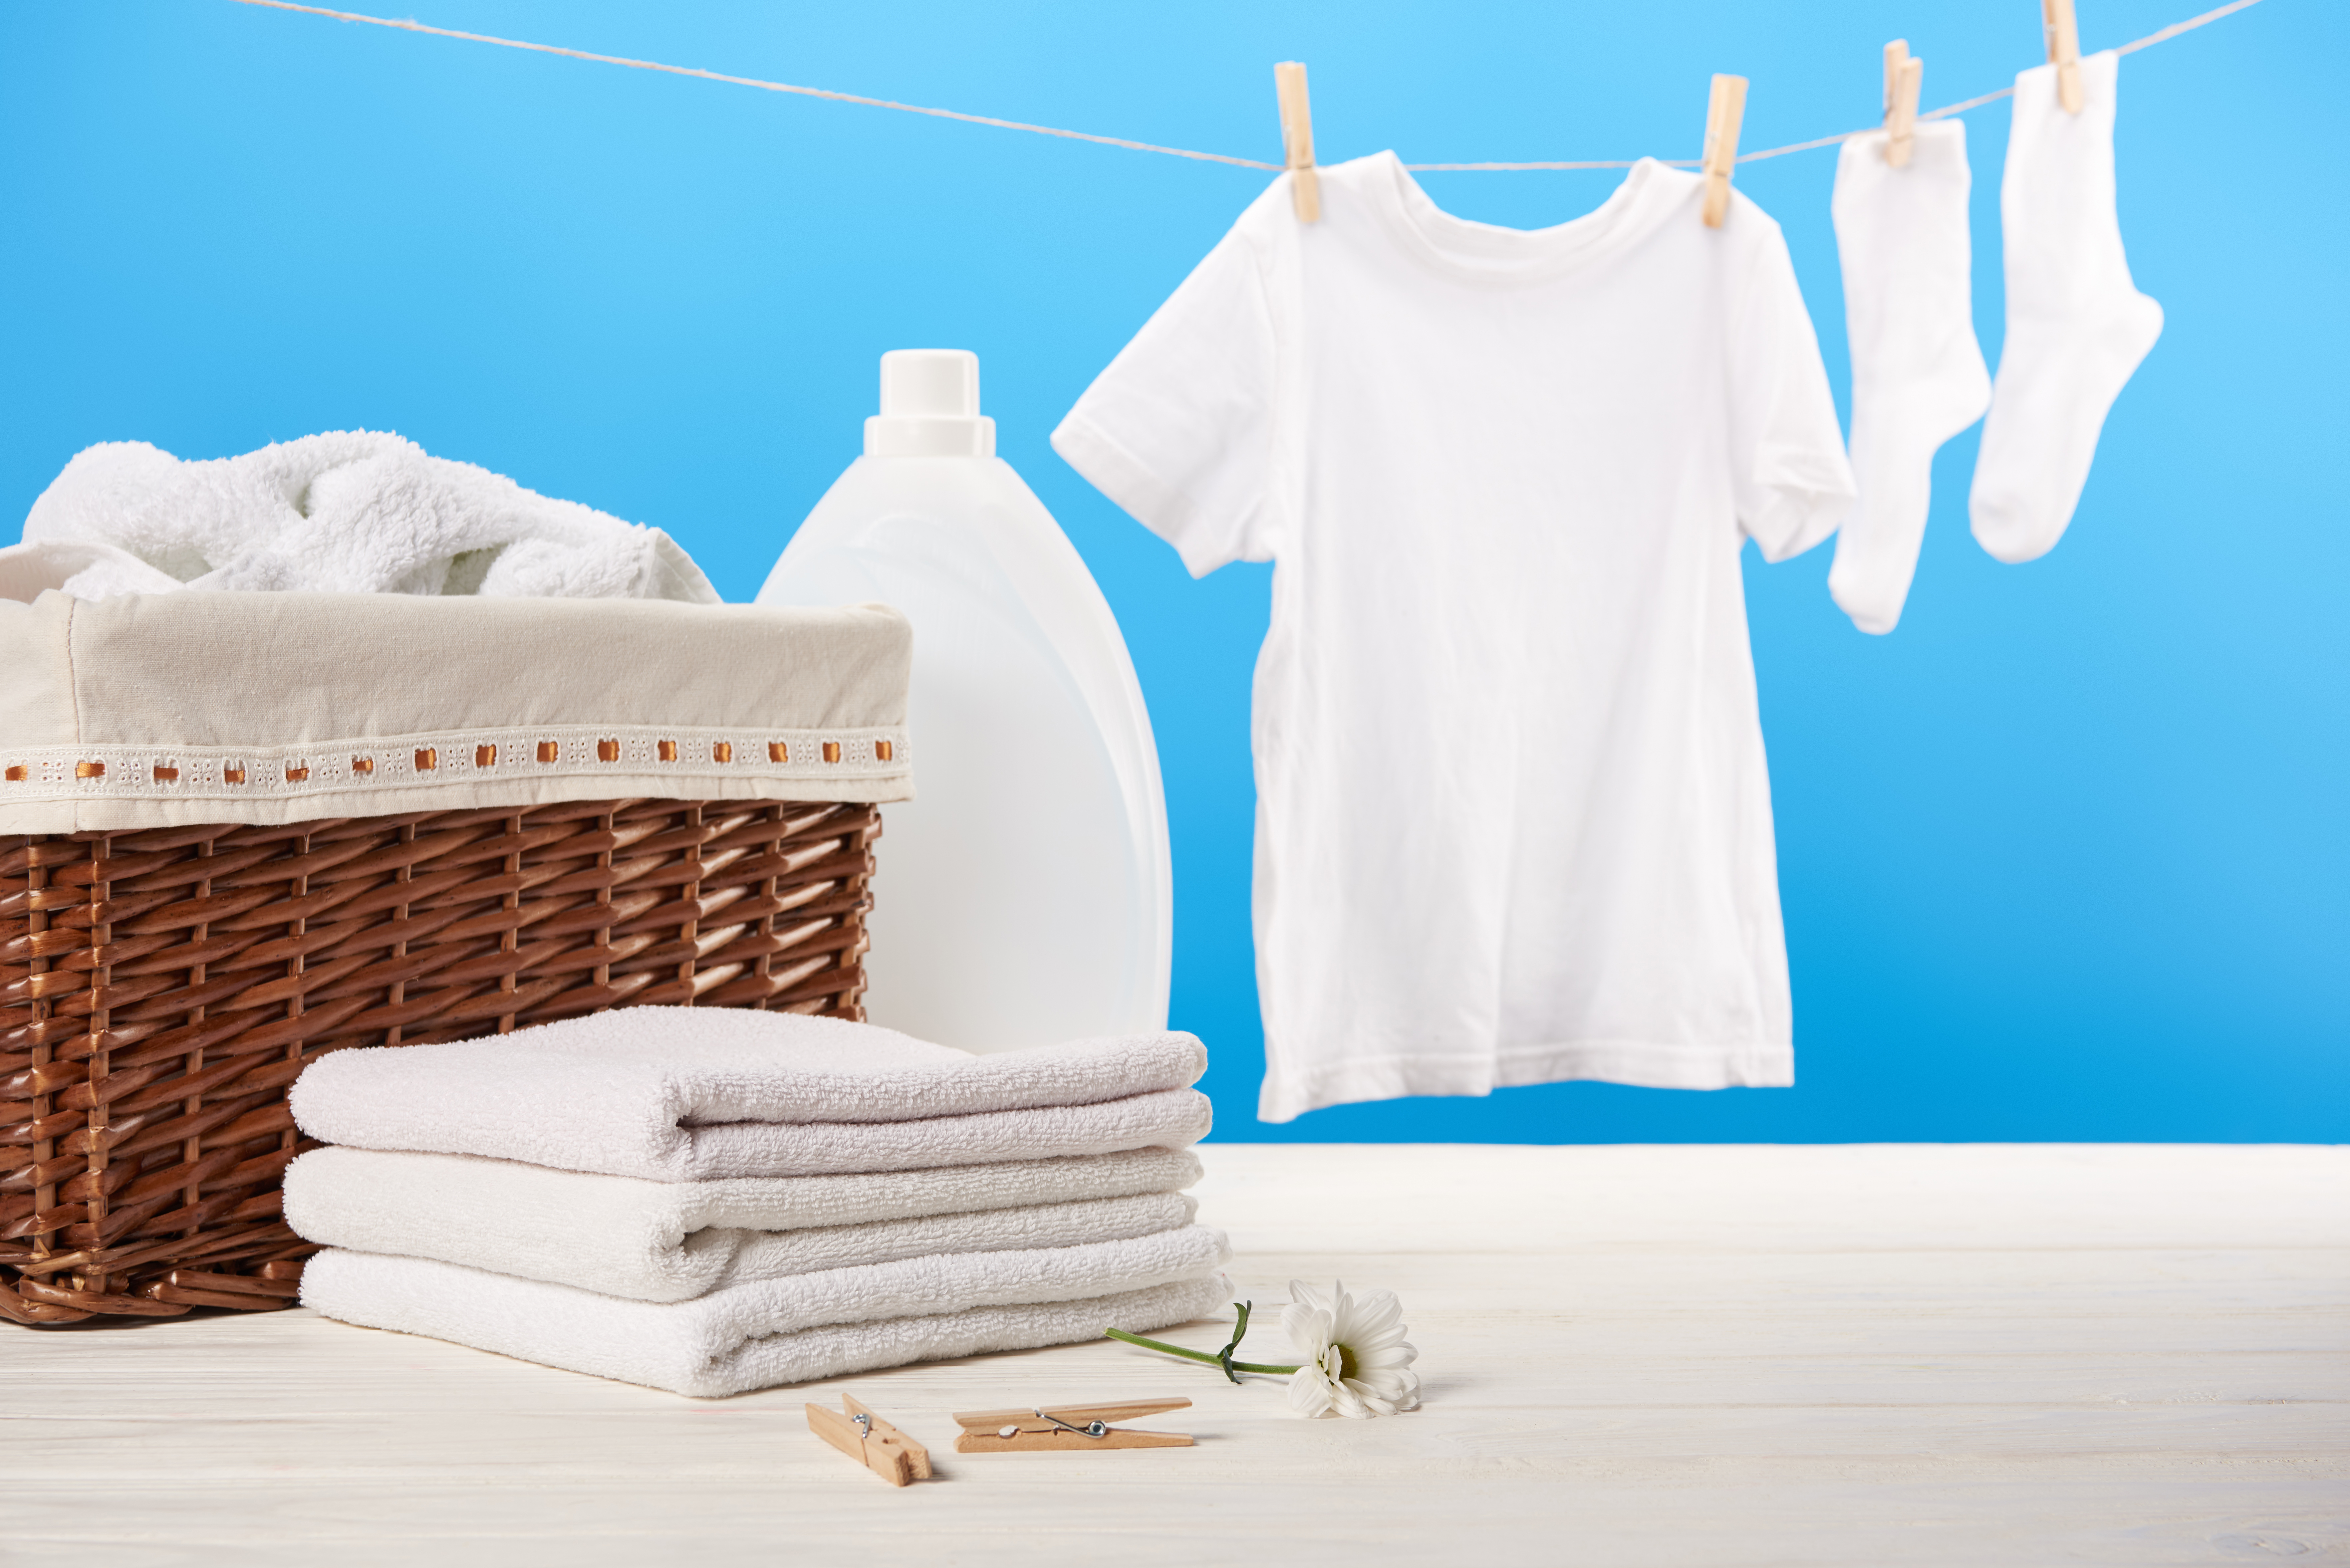 White clothes and towels | Source: Shutterstock